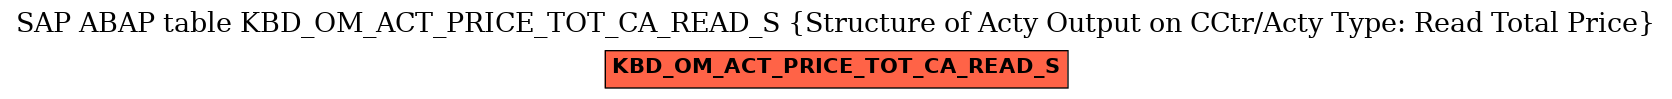 E-R Diagram for table KBD_OM_ACT_PRICE_TOT_CA_READ_S (Structure of Acty Output on CCtr/Acty Type: Read Total Price)